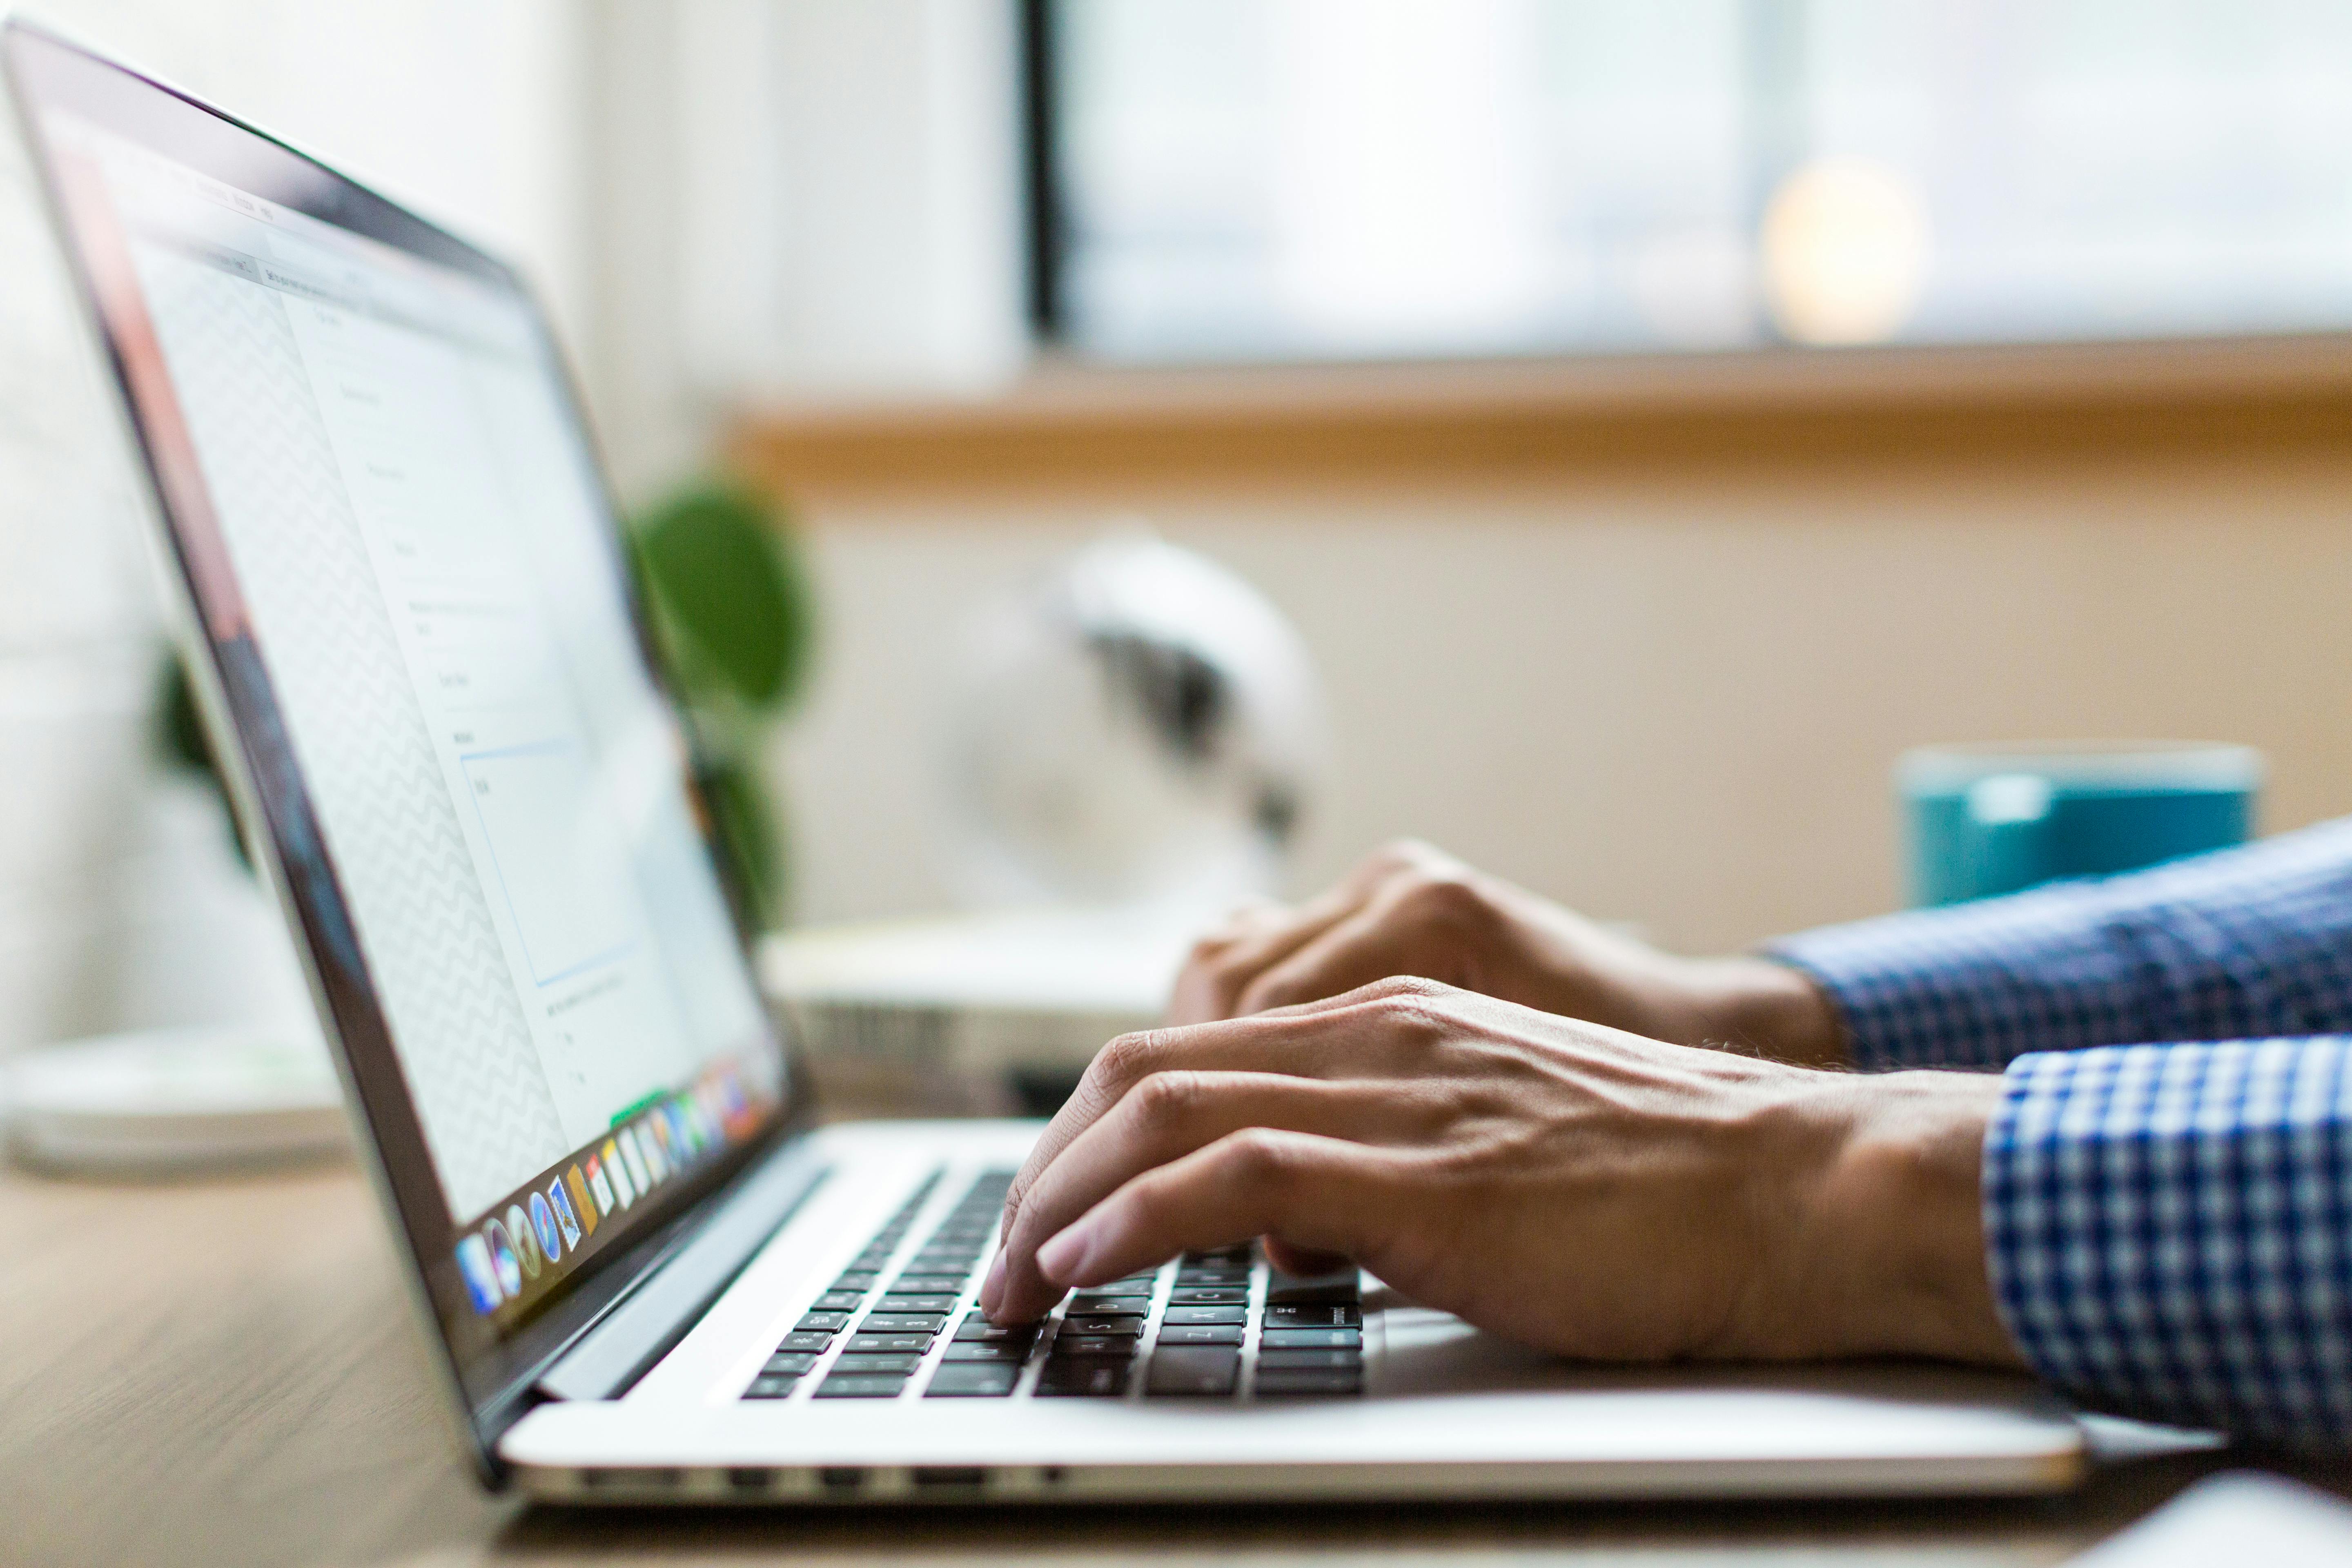 A man is typing on the laptop keyboard. | Photo: Pexels